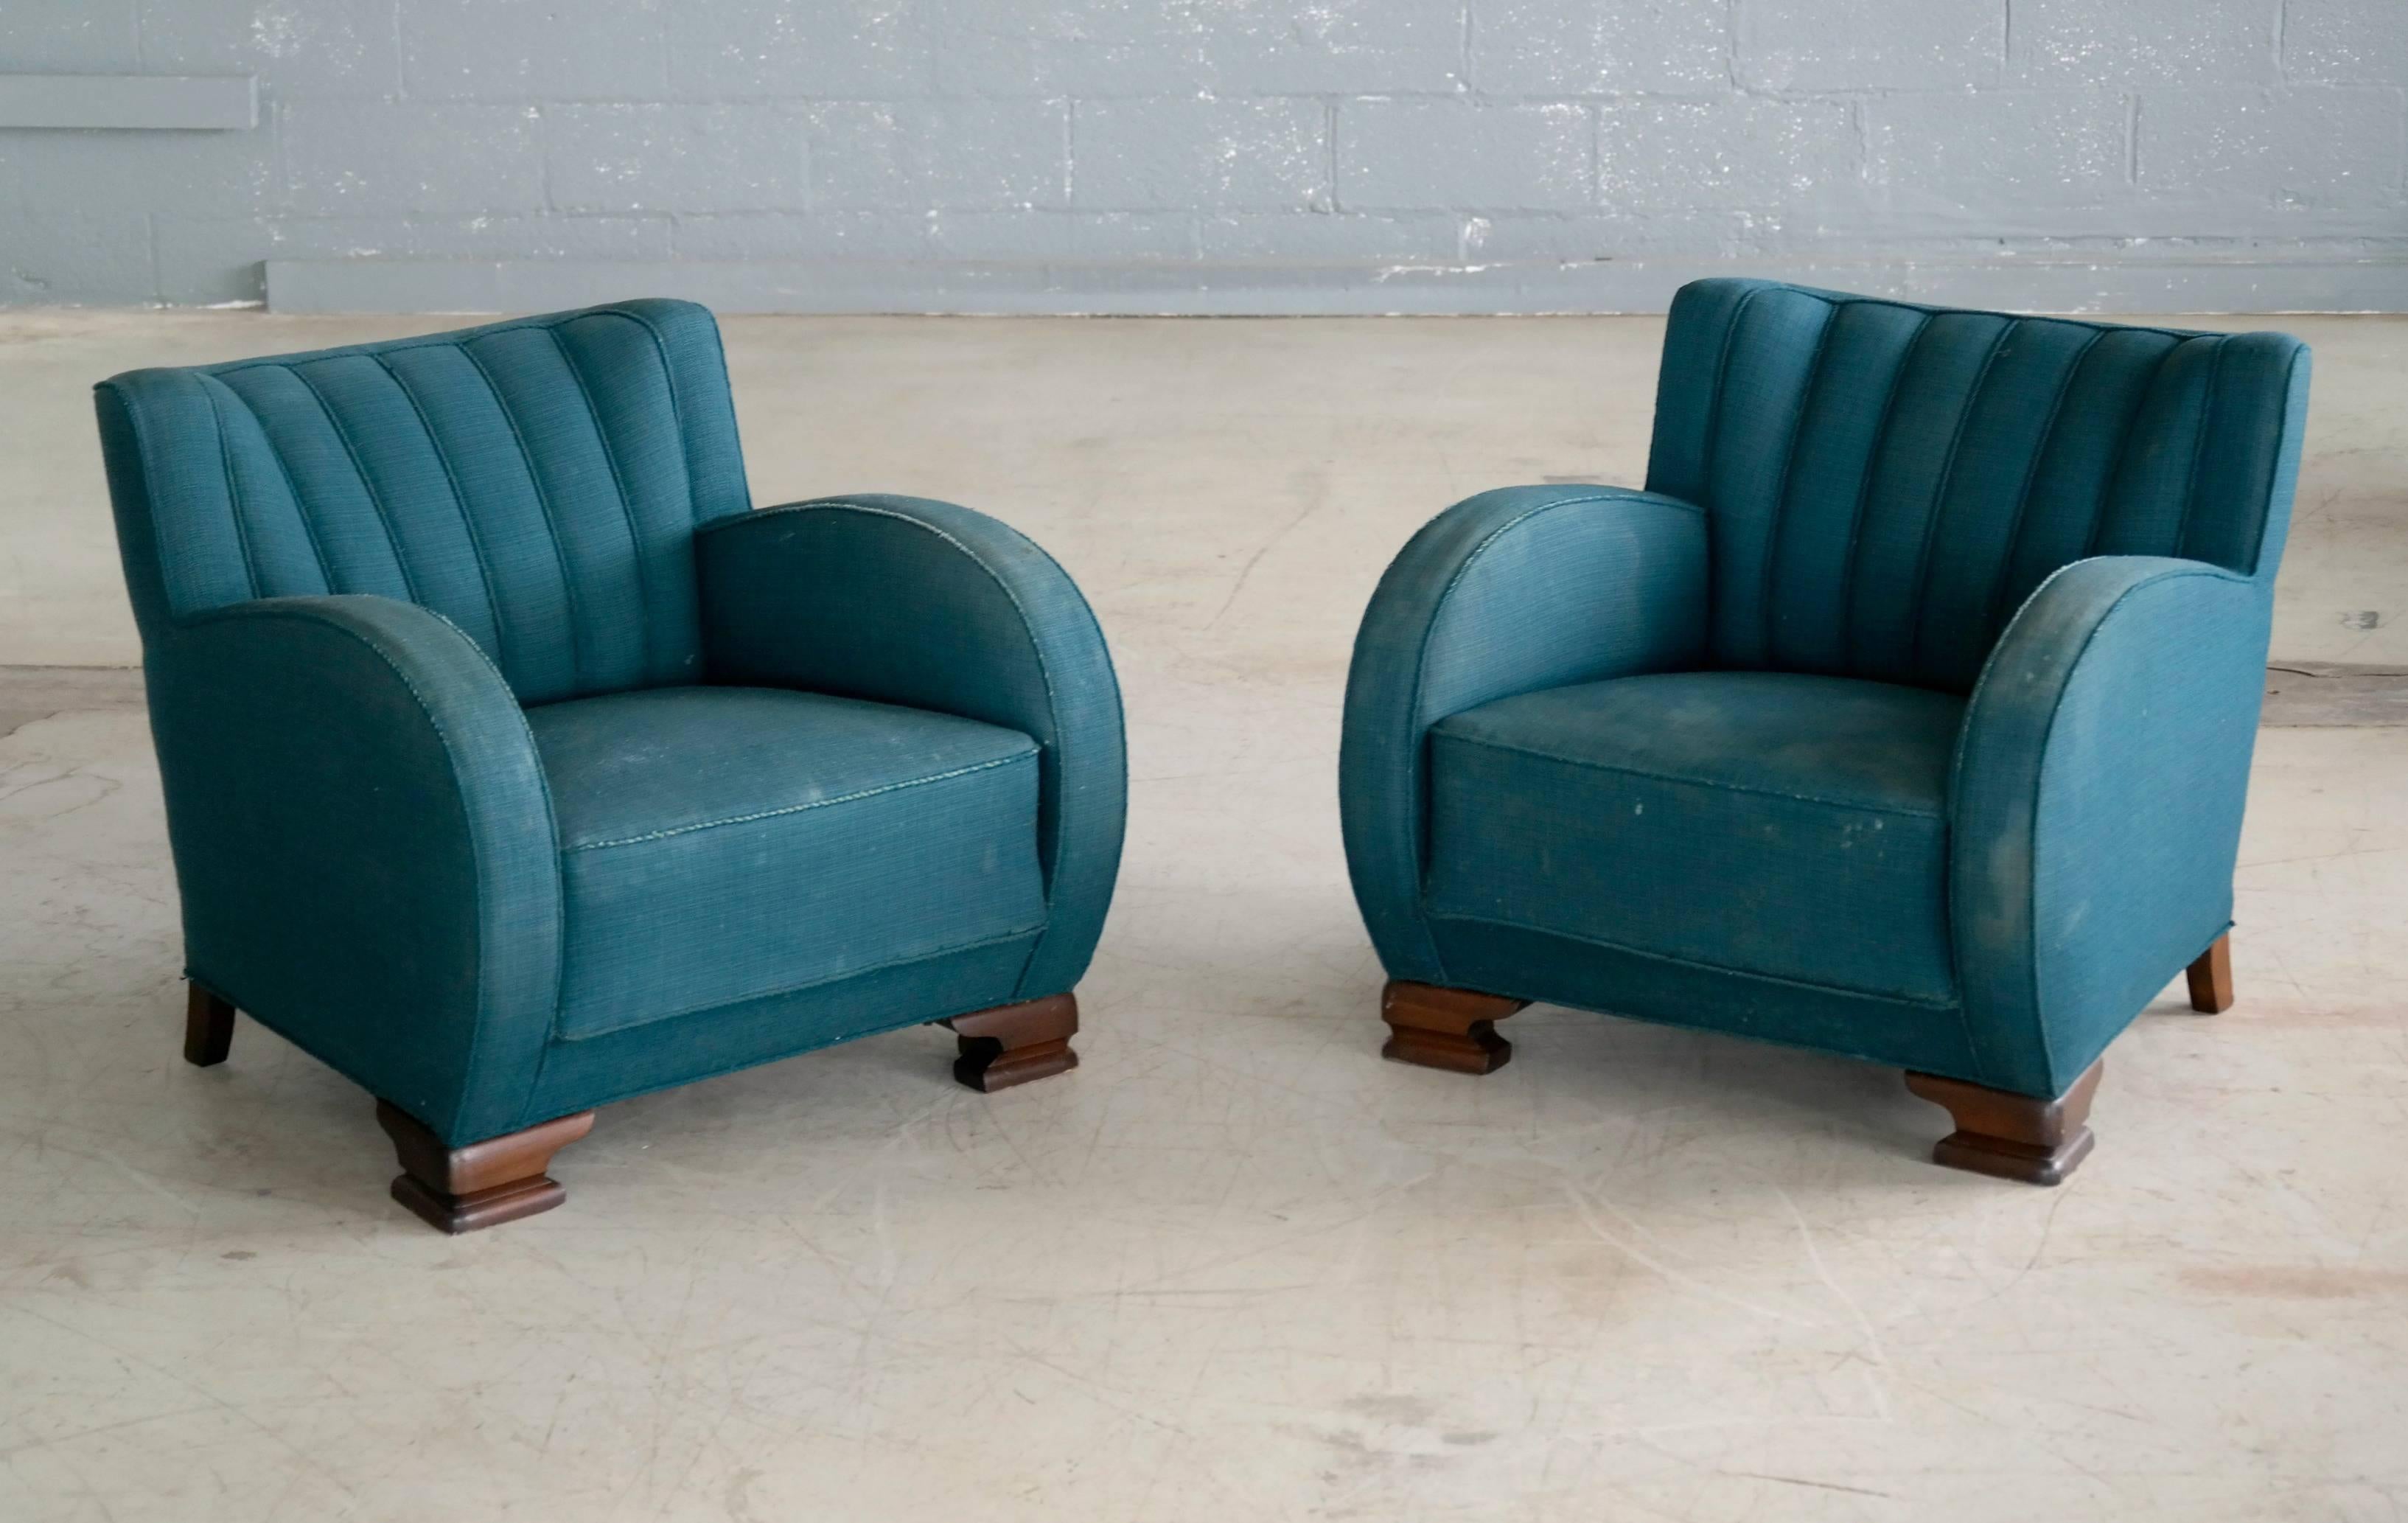 Exuberant, curvy and very eye-catching pair of Danish lounge chairs from the 1940s.
Set on block feet typical of the period and with a channeled back reminiscent of sports car seats of the era. Sturdy and sound construction but with significant